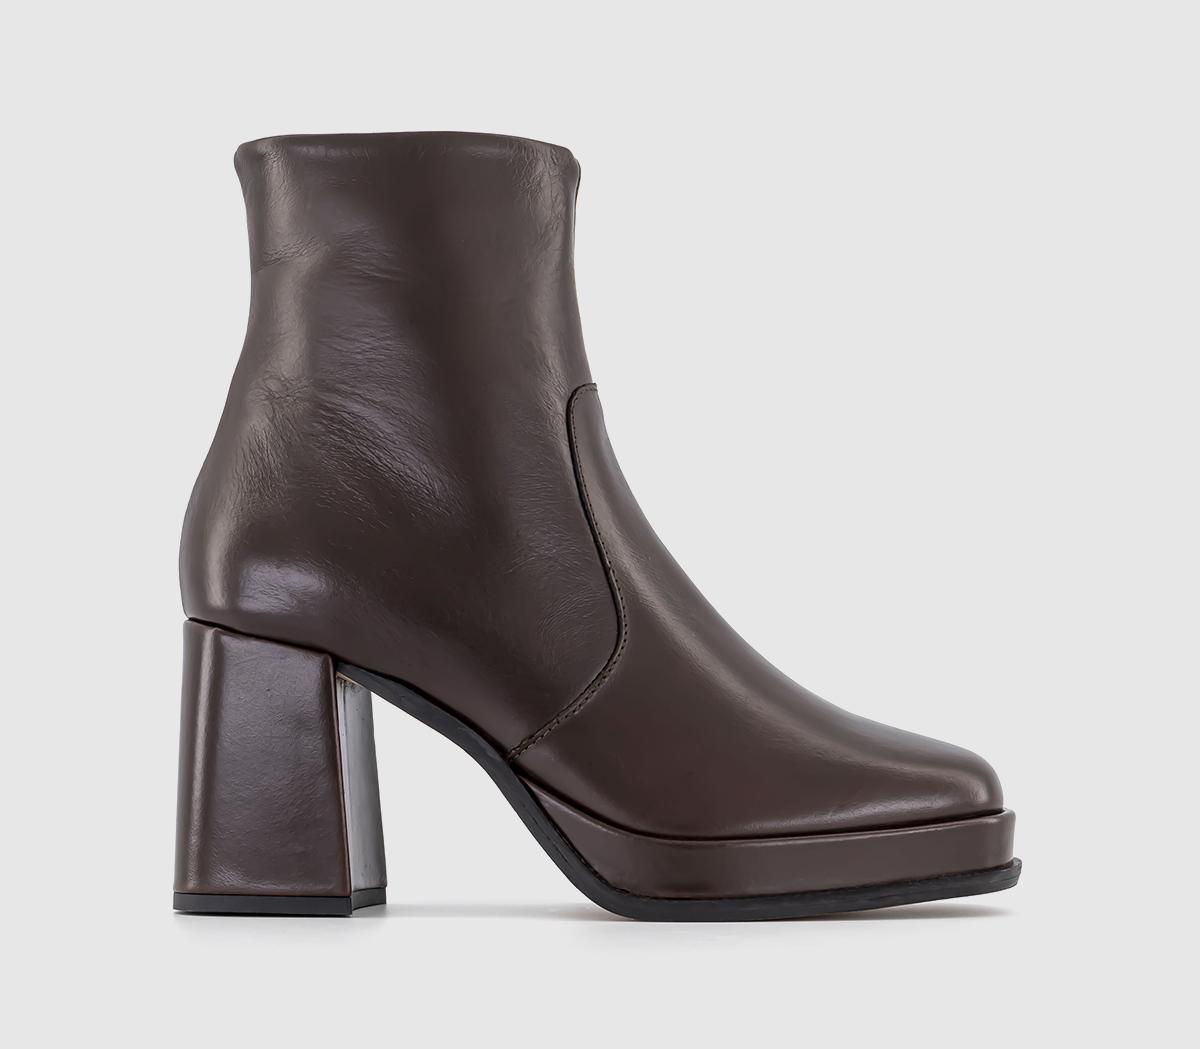 Apply Covered Platform Block Heel Ankle Boots Brown Leather